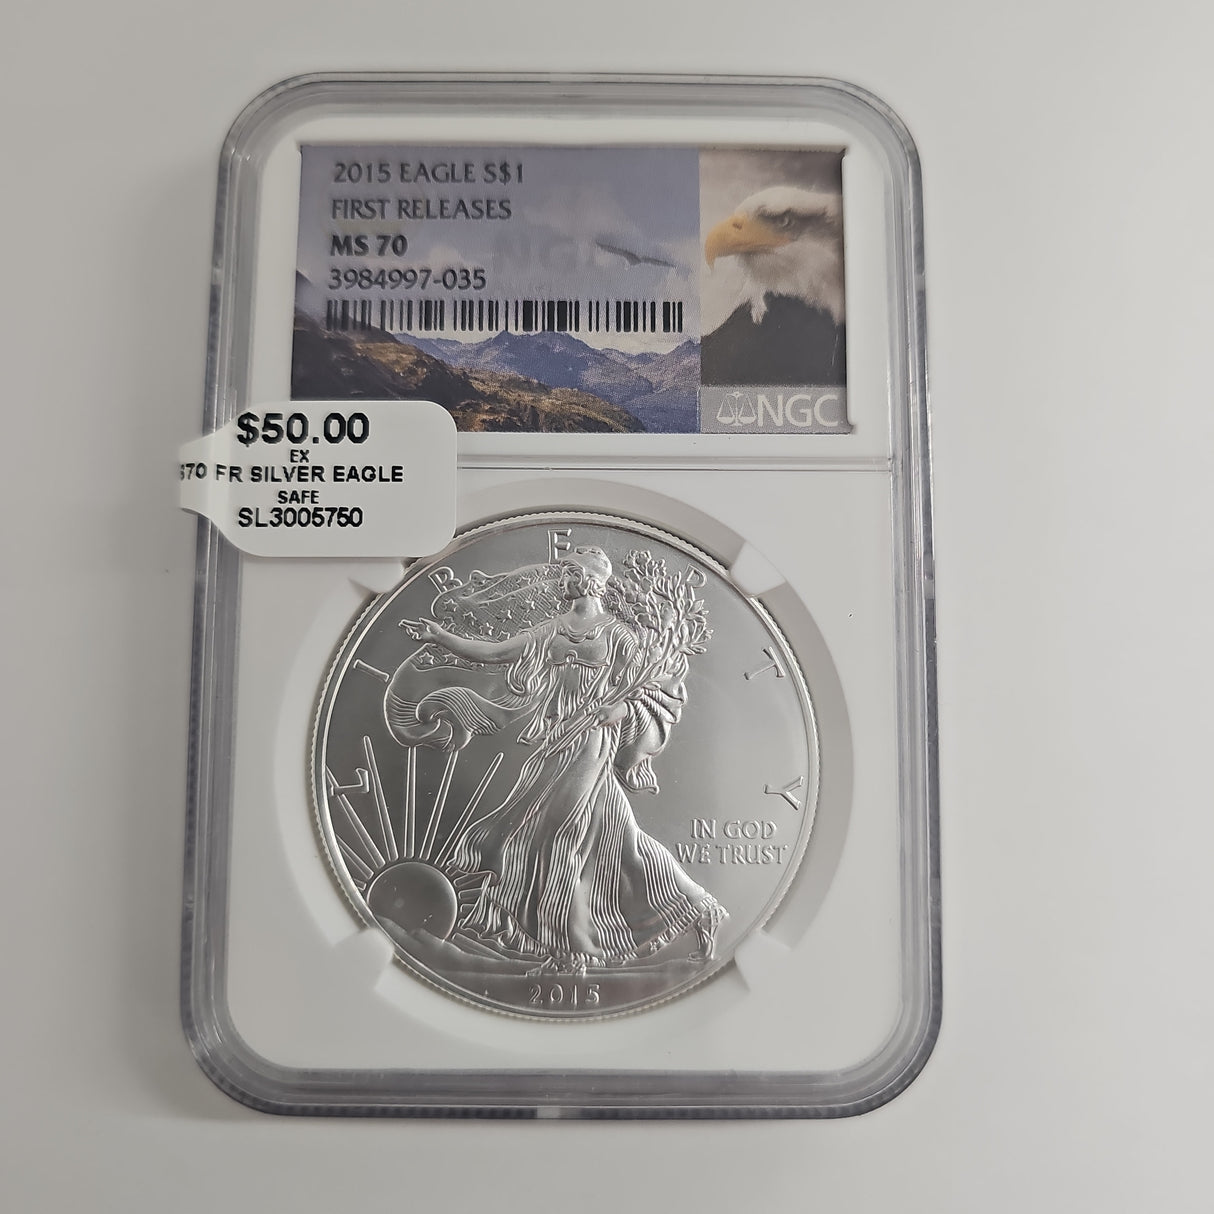 2015 EAGLE FIRST RELEASES S$1 NGC MS 70